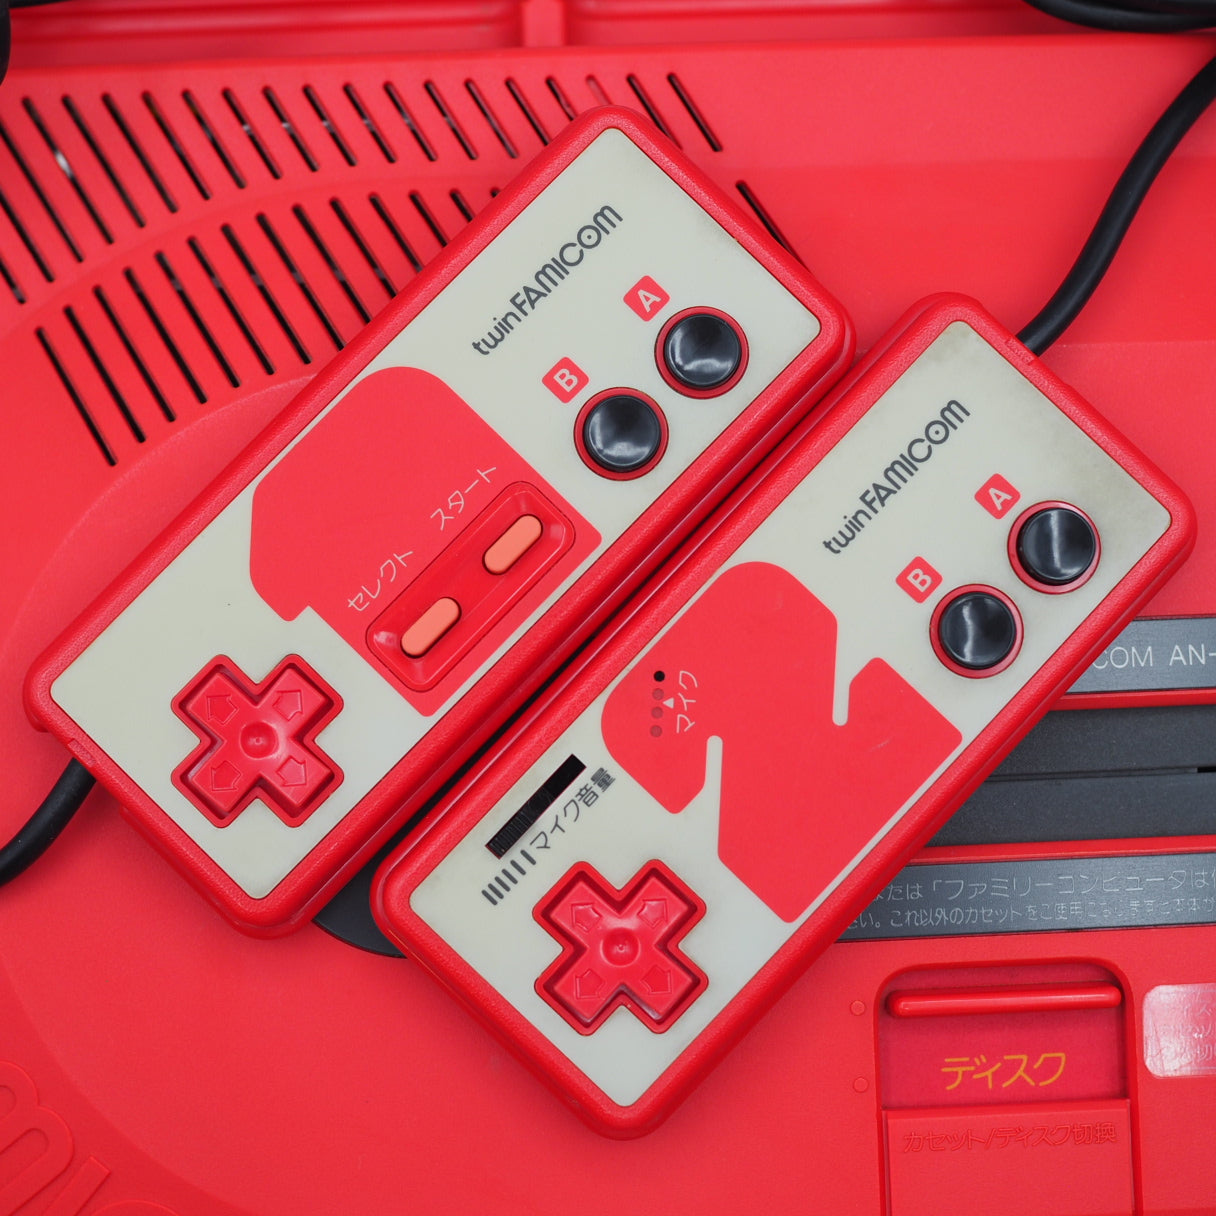 Twin Famicom AN-500R [New Rubber Belt replaced] Boxed